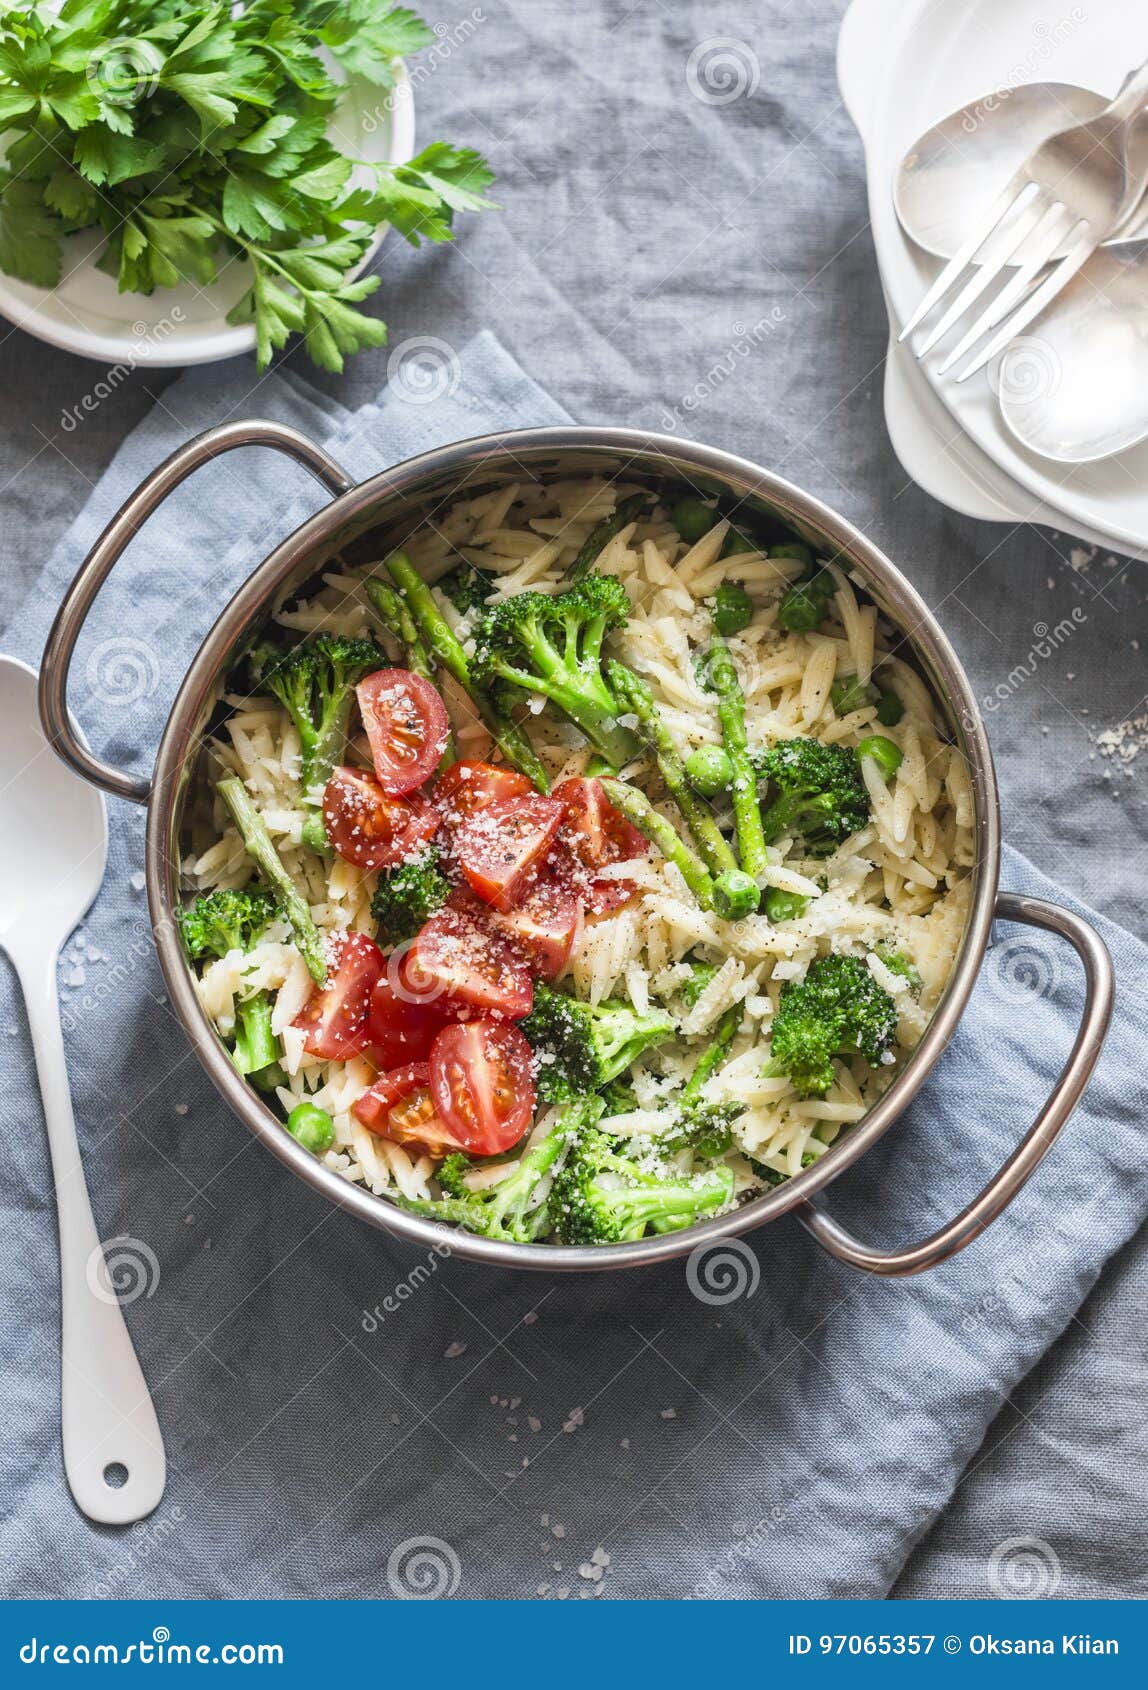 one pot orzo primavera. orzo pasta with asparagus, broccoli, green peas and cream in a saucepan. on a light background